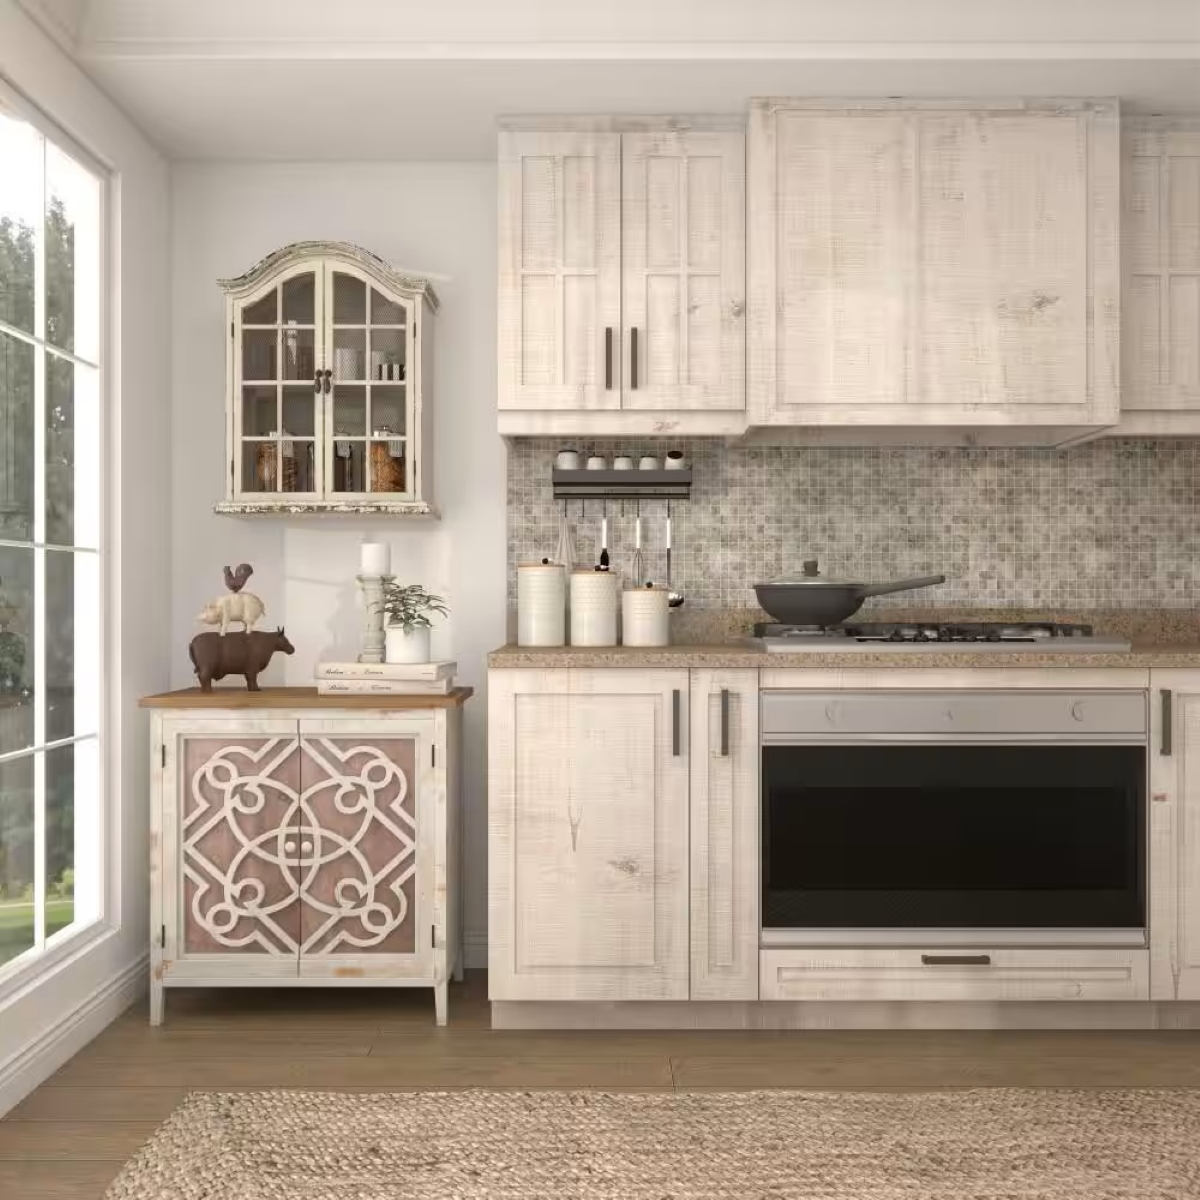 White kitchen with distressed cabinets.